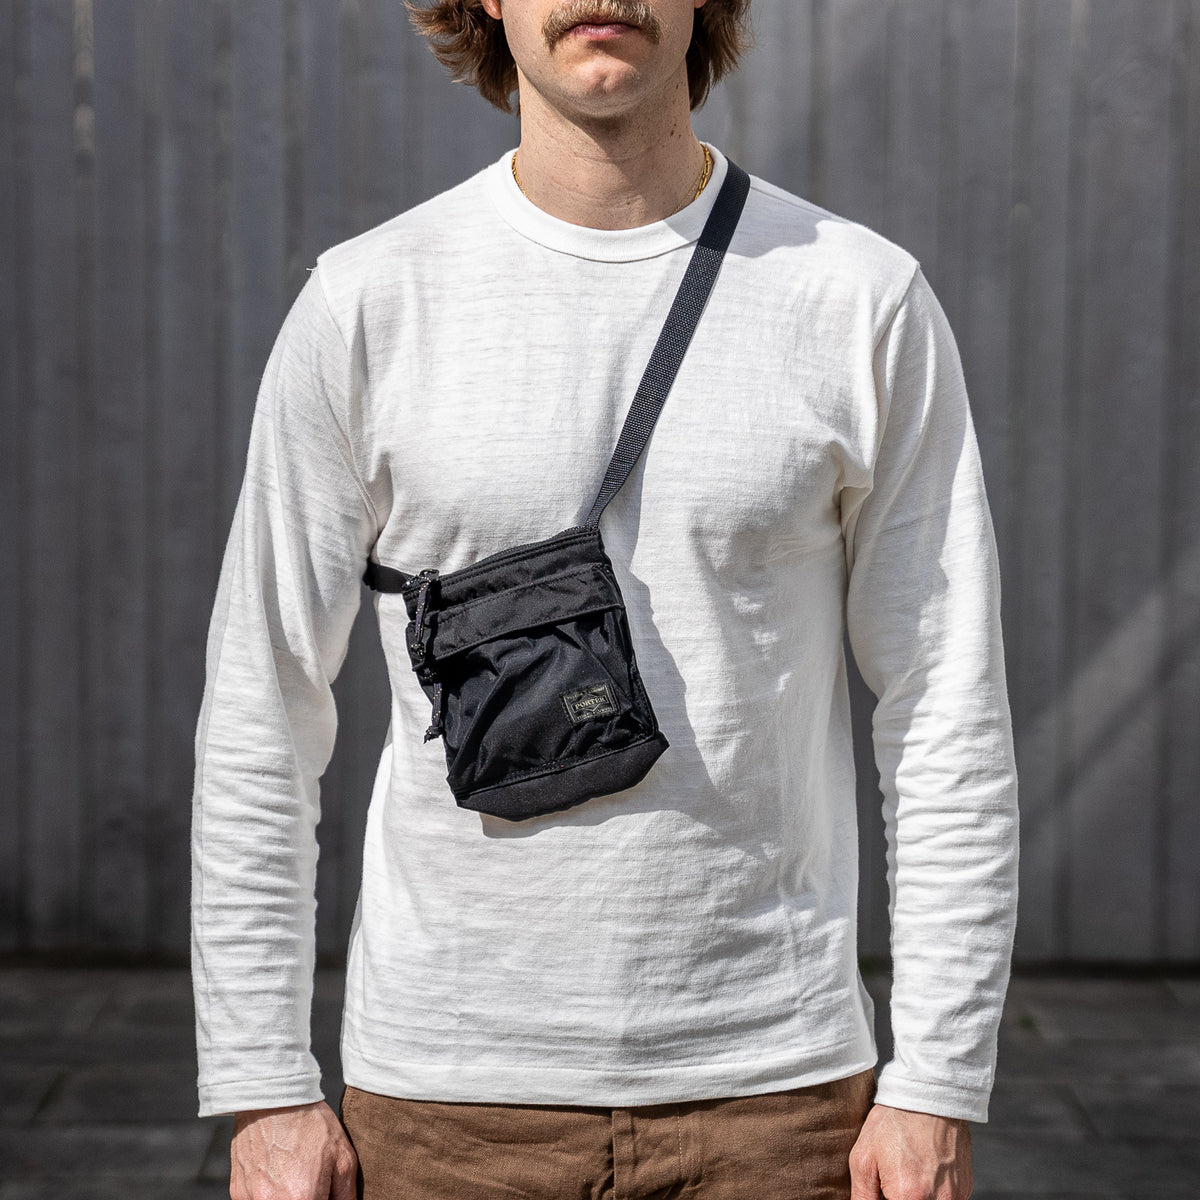 Porter Force Shoulder Pouch - Get it here!